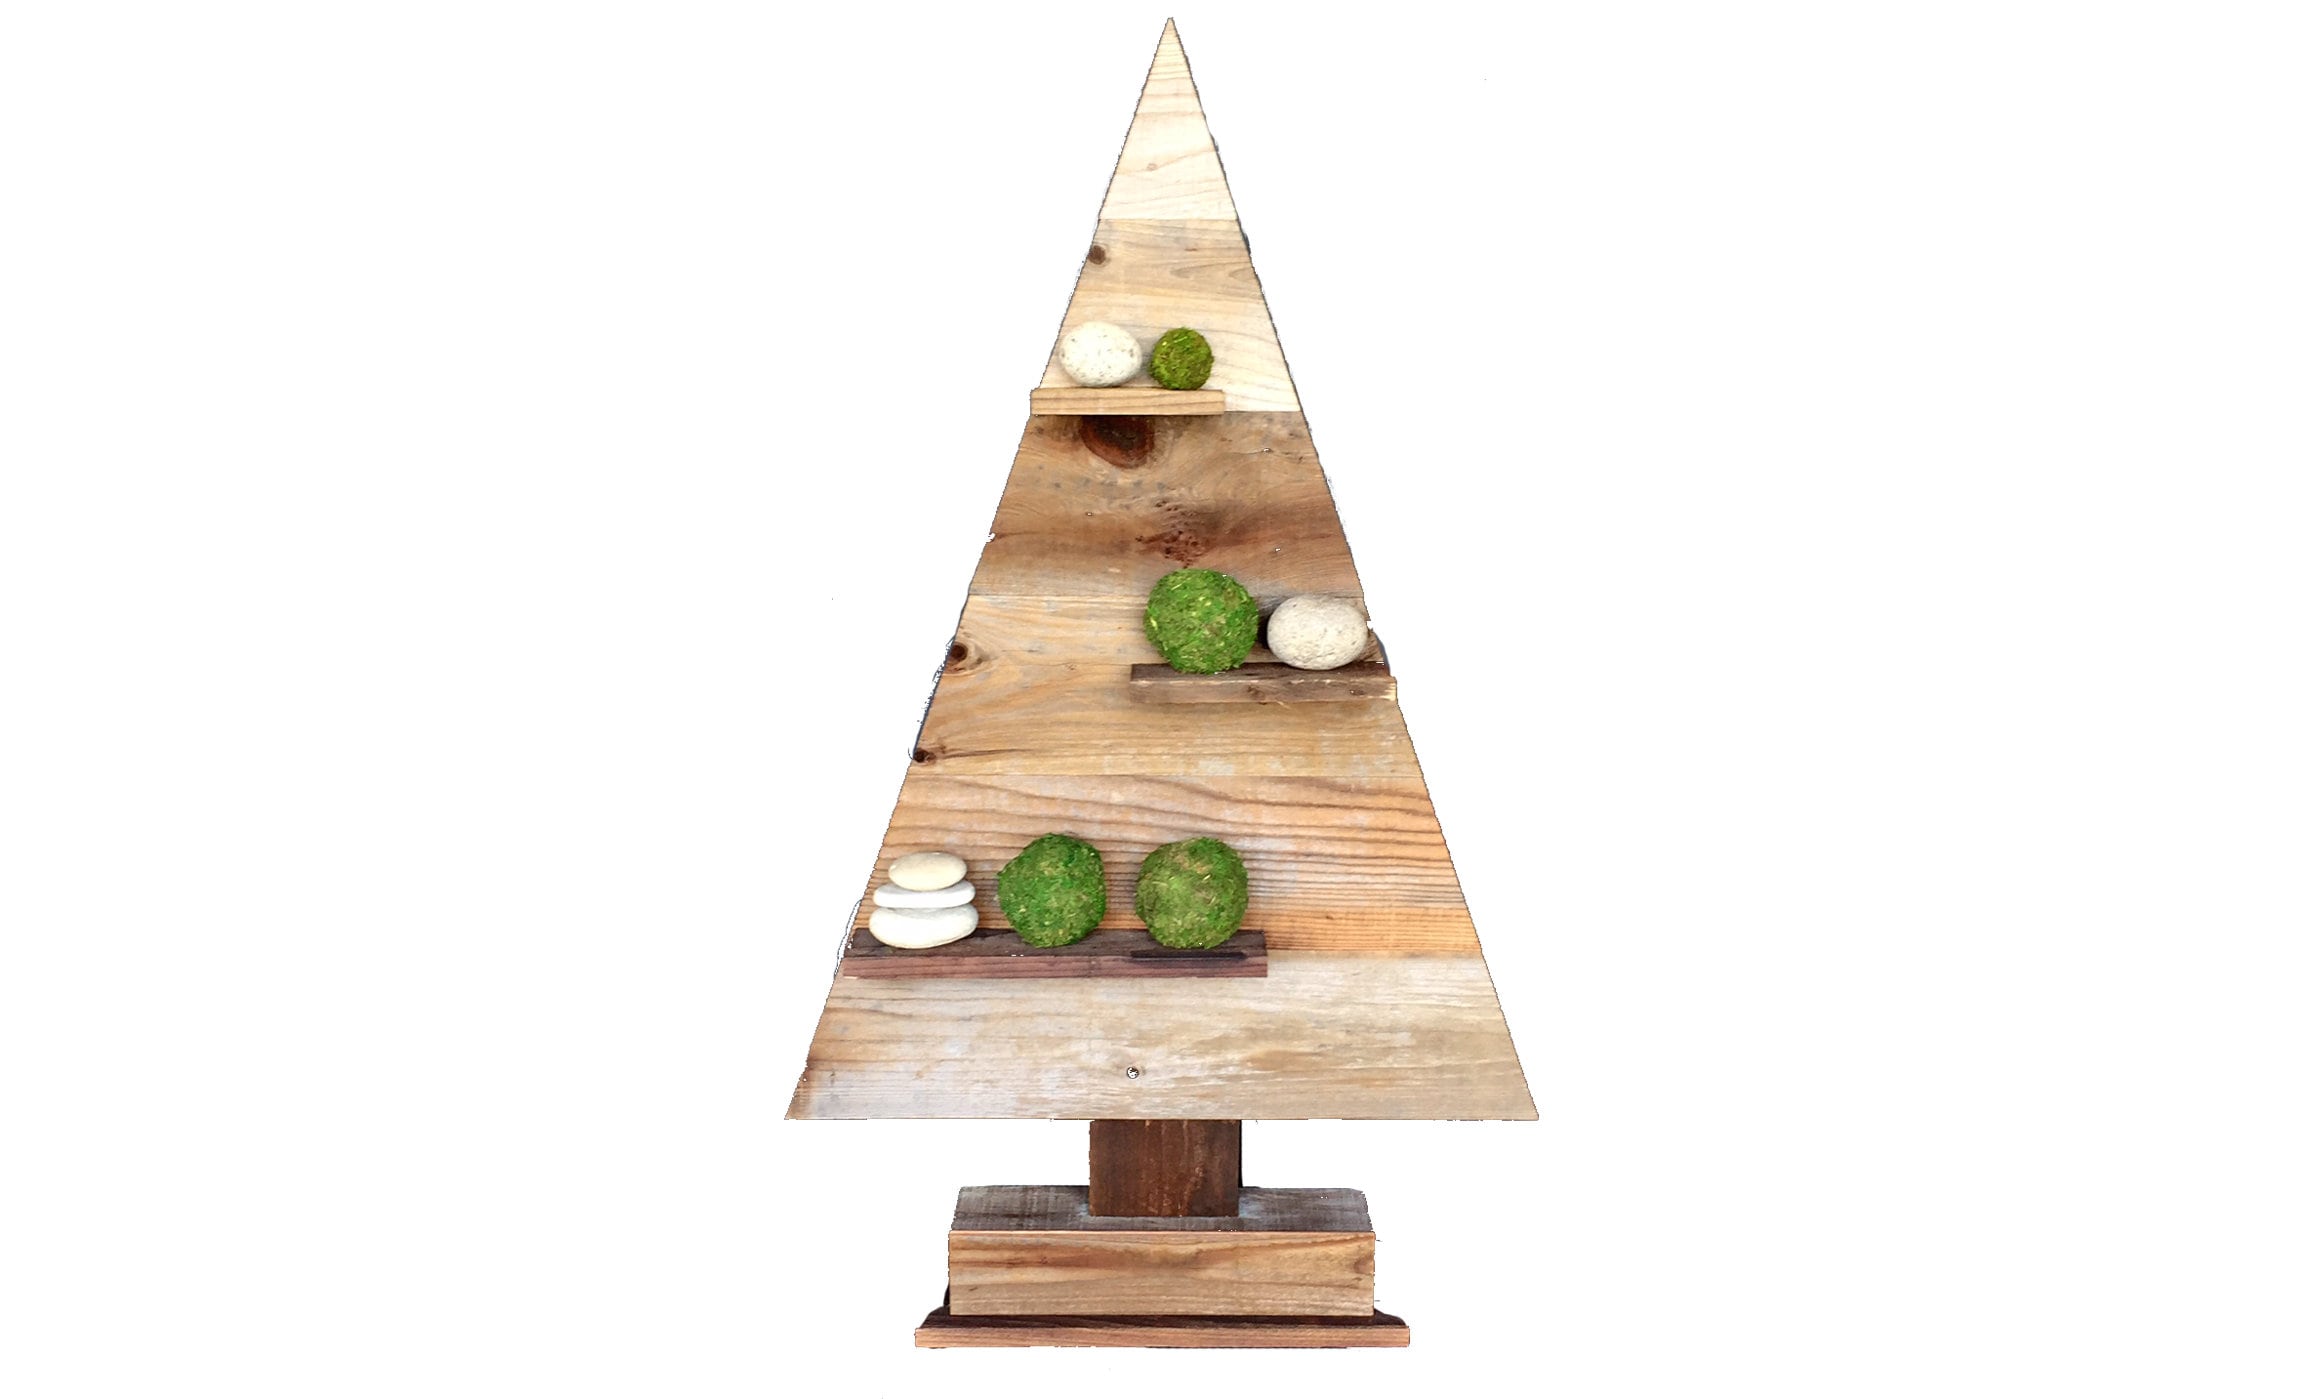 Wood Triangle Retail Merchandising Tree Holiday Store Display Case Christmas 3FT 